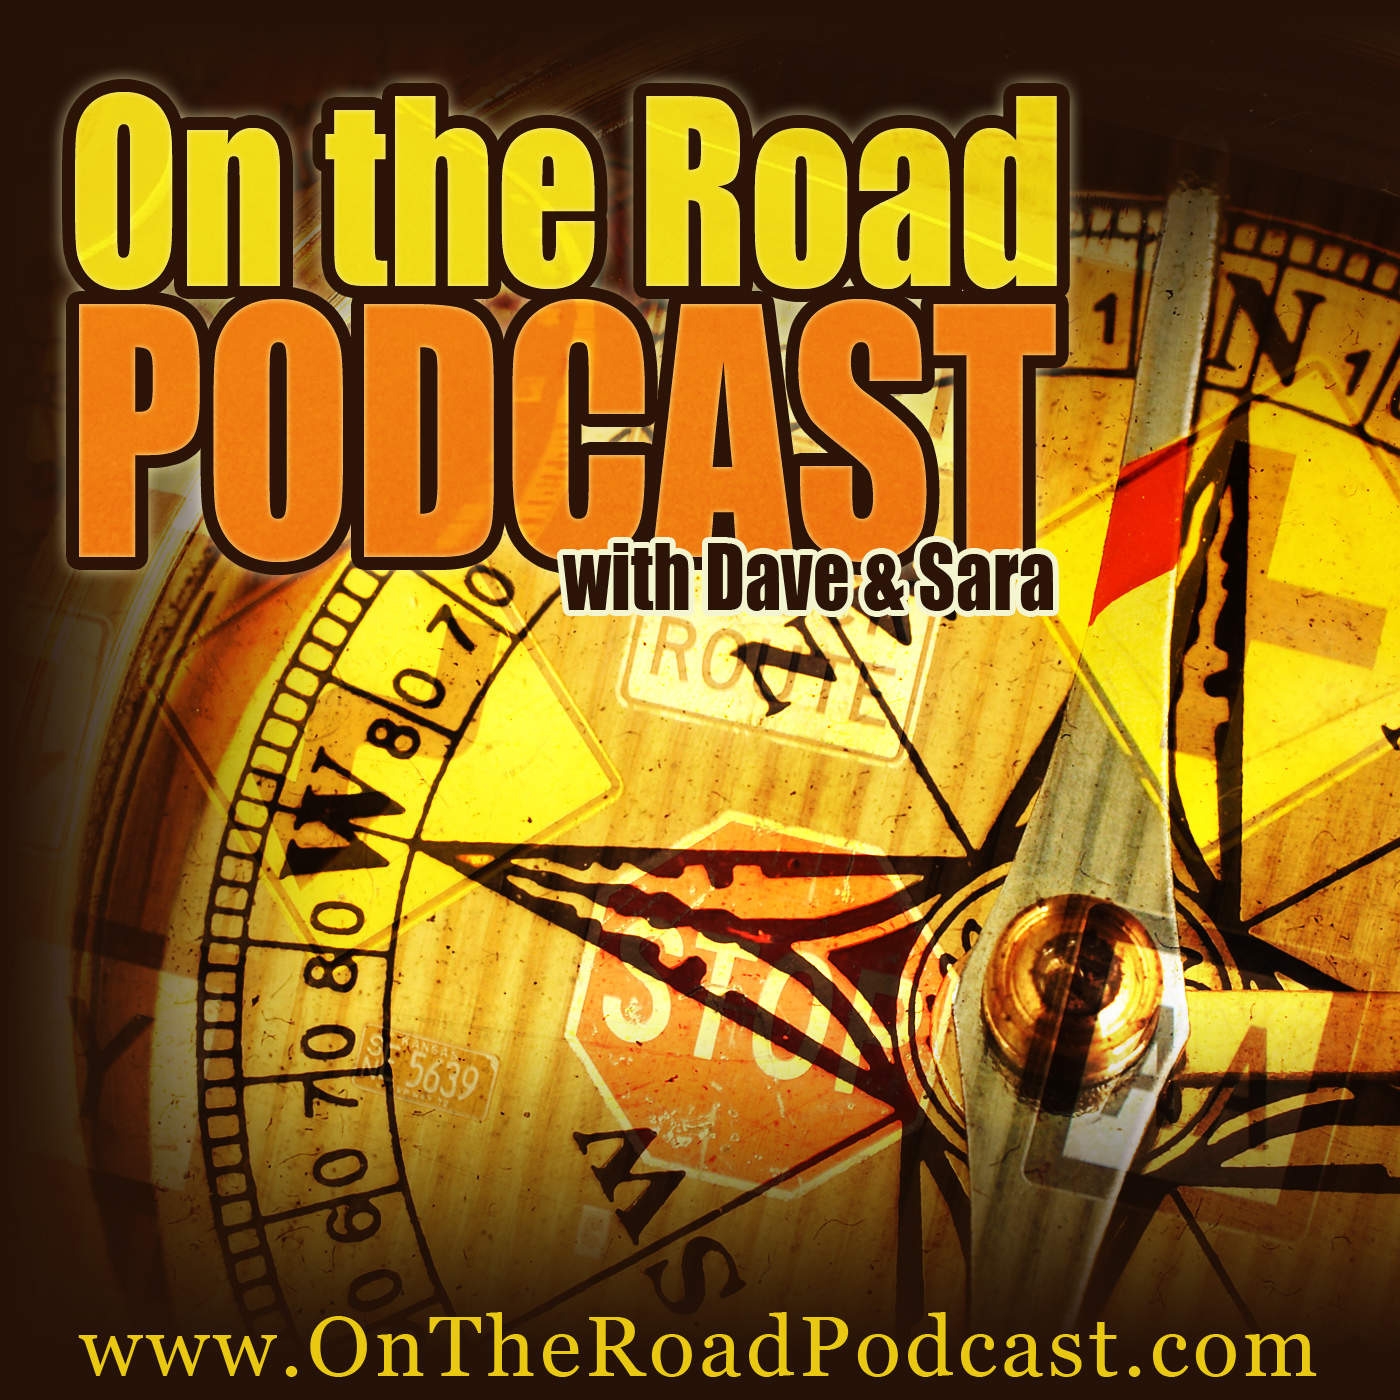 On the Road Podcast